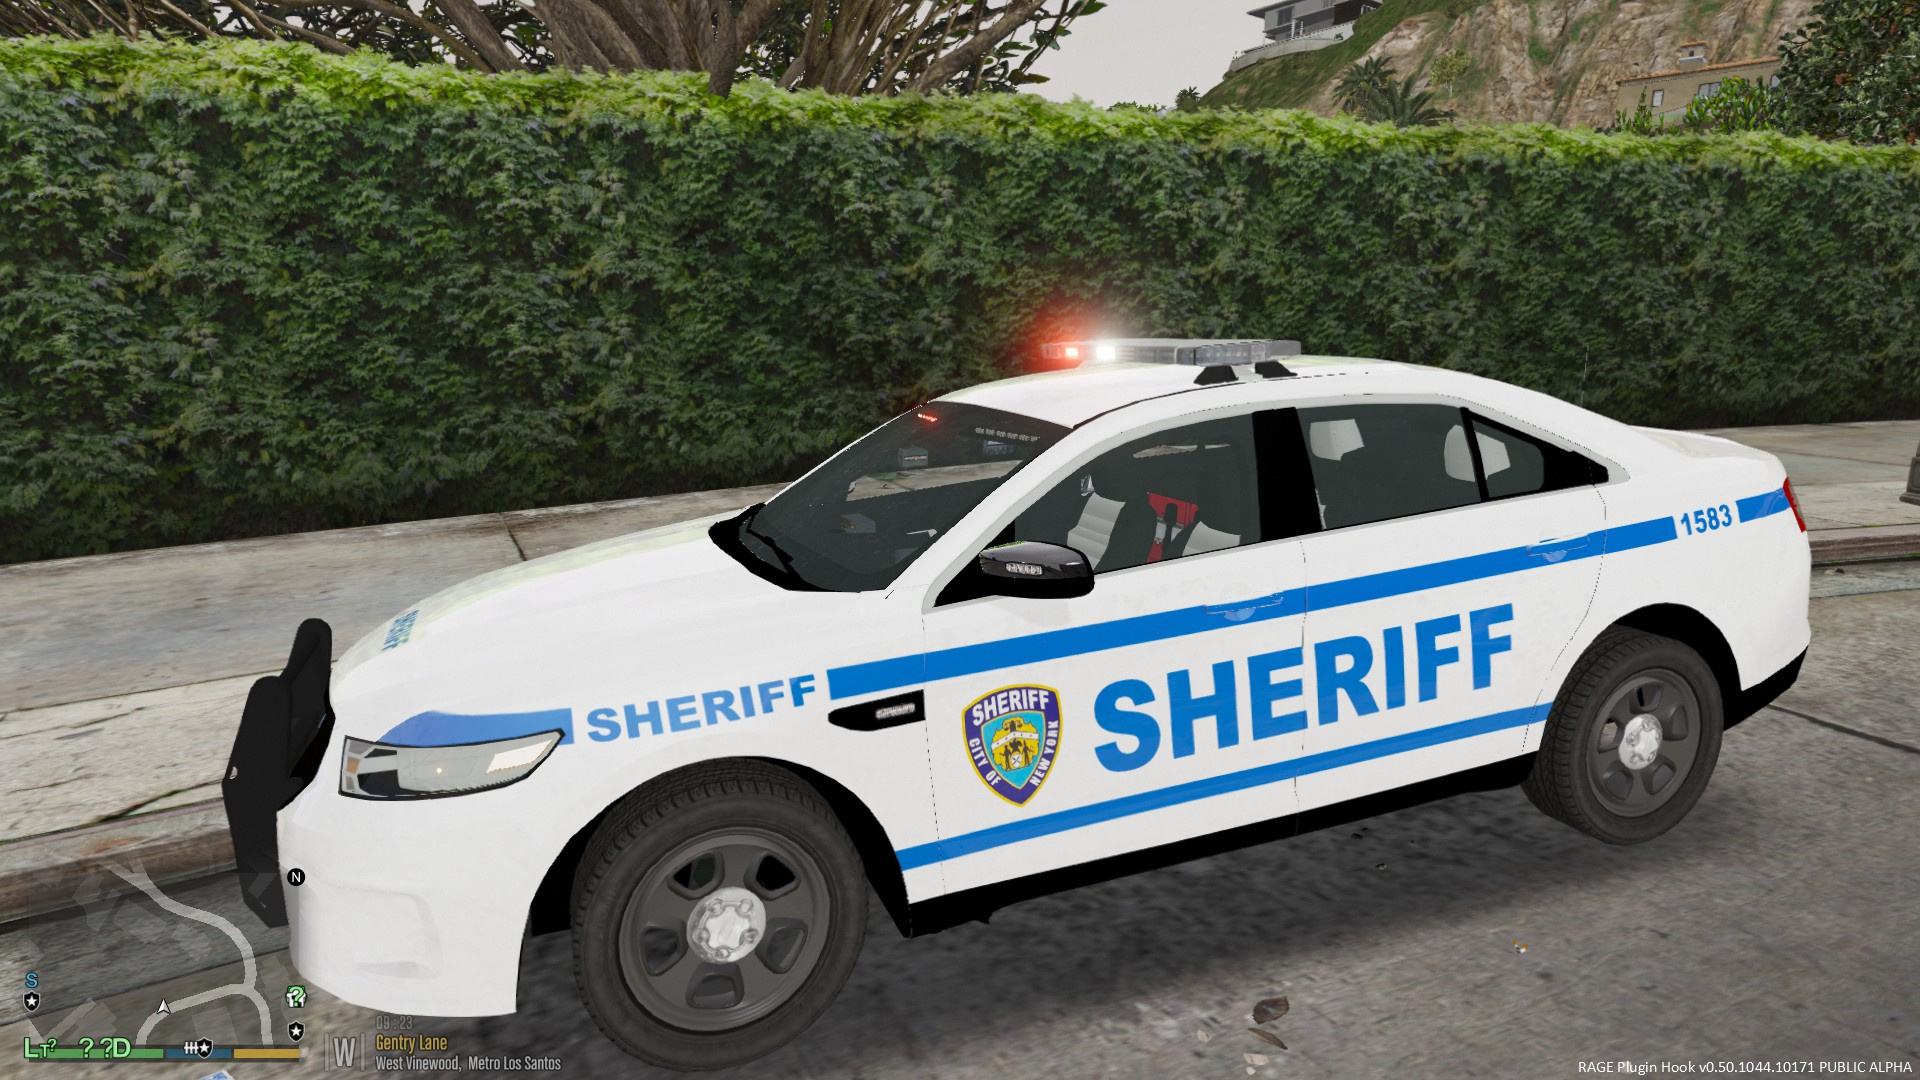 in-and-out-design: Nyc Sheriff Vehicle Auction